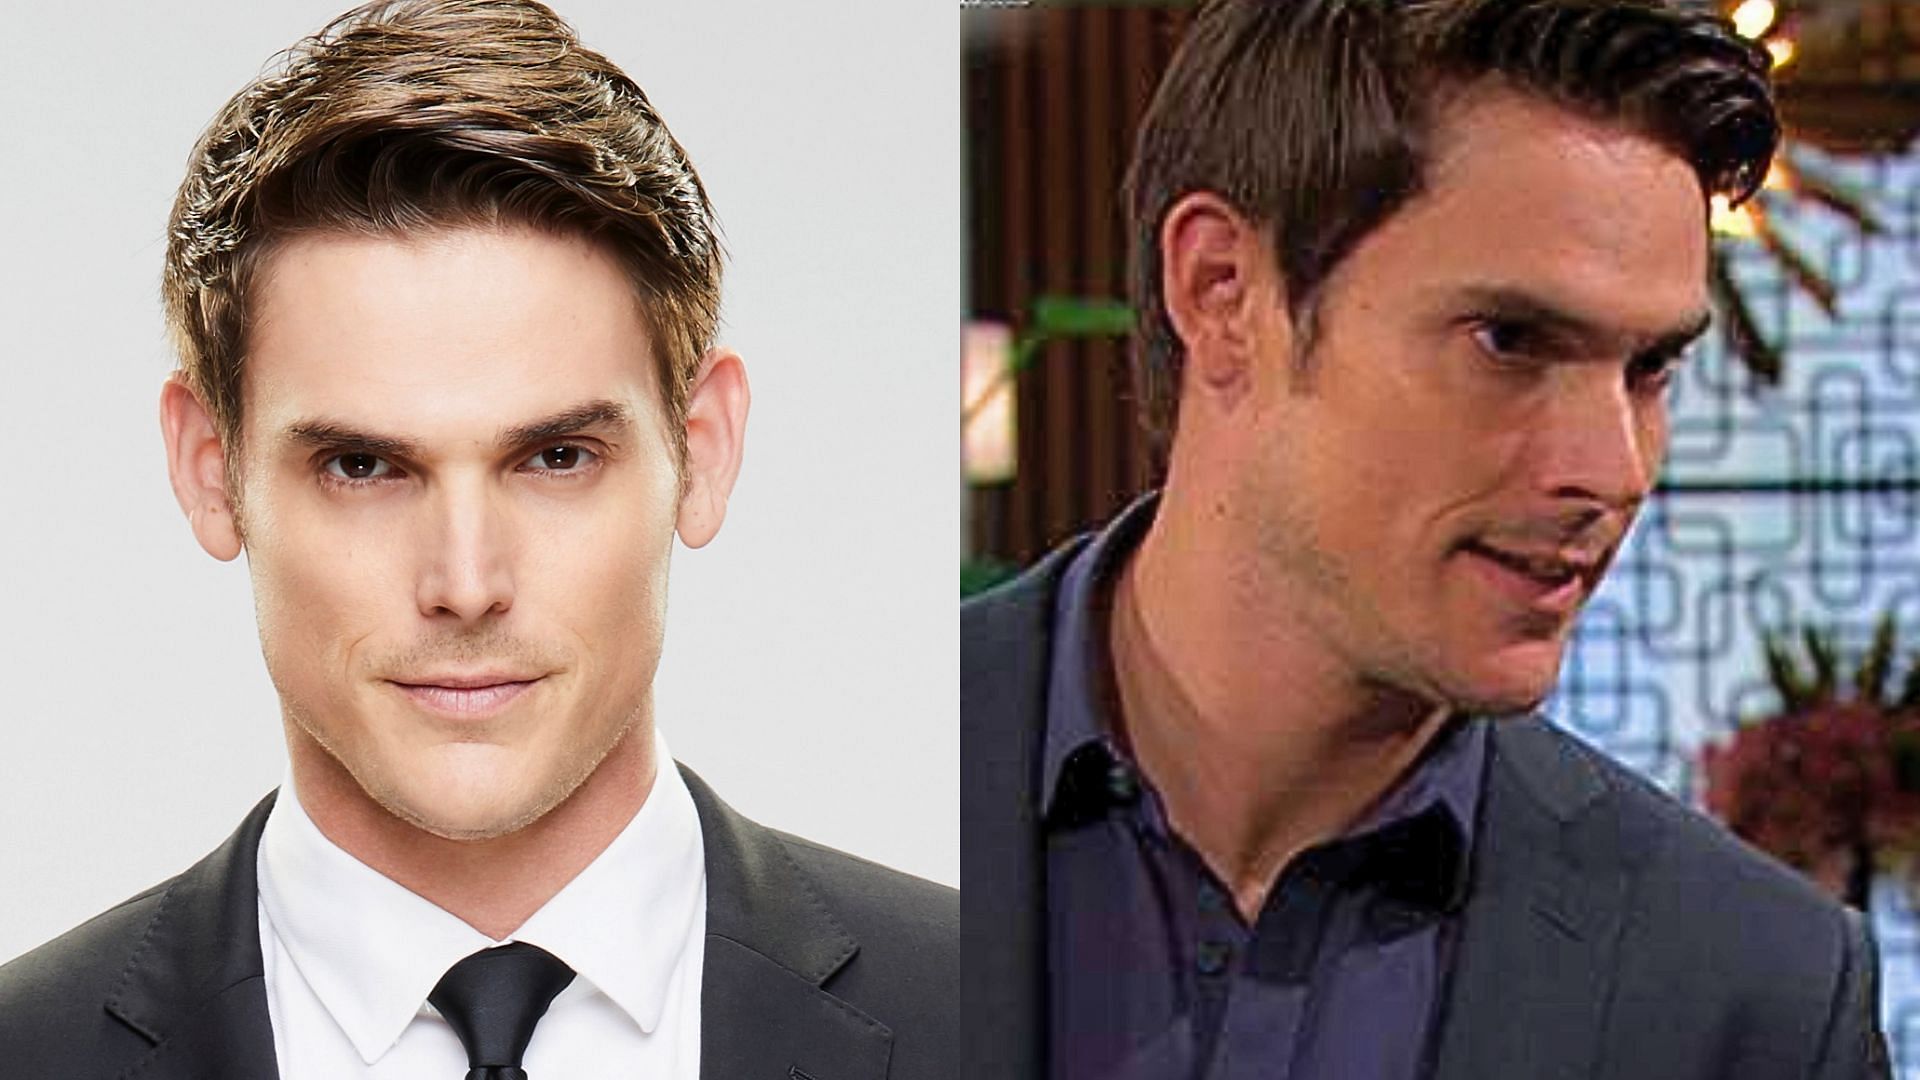 (L) Mark Grossman currently plays (R) Adam Newman on The Young and the Restless (Images via IMDb and CBS)